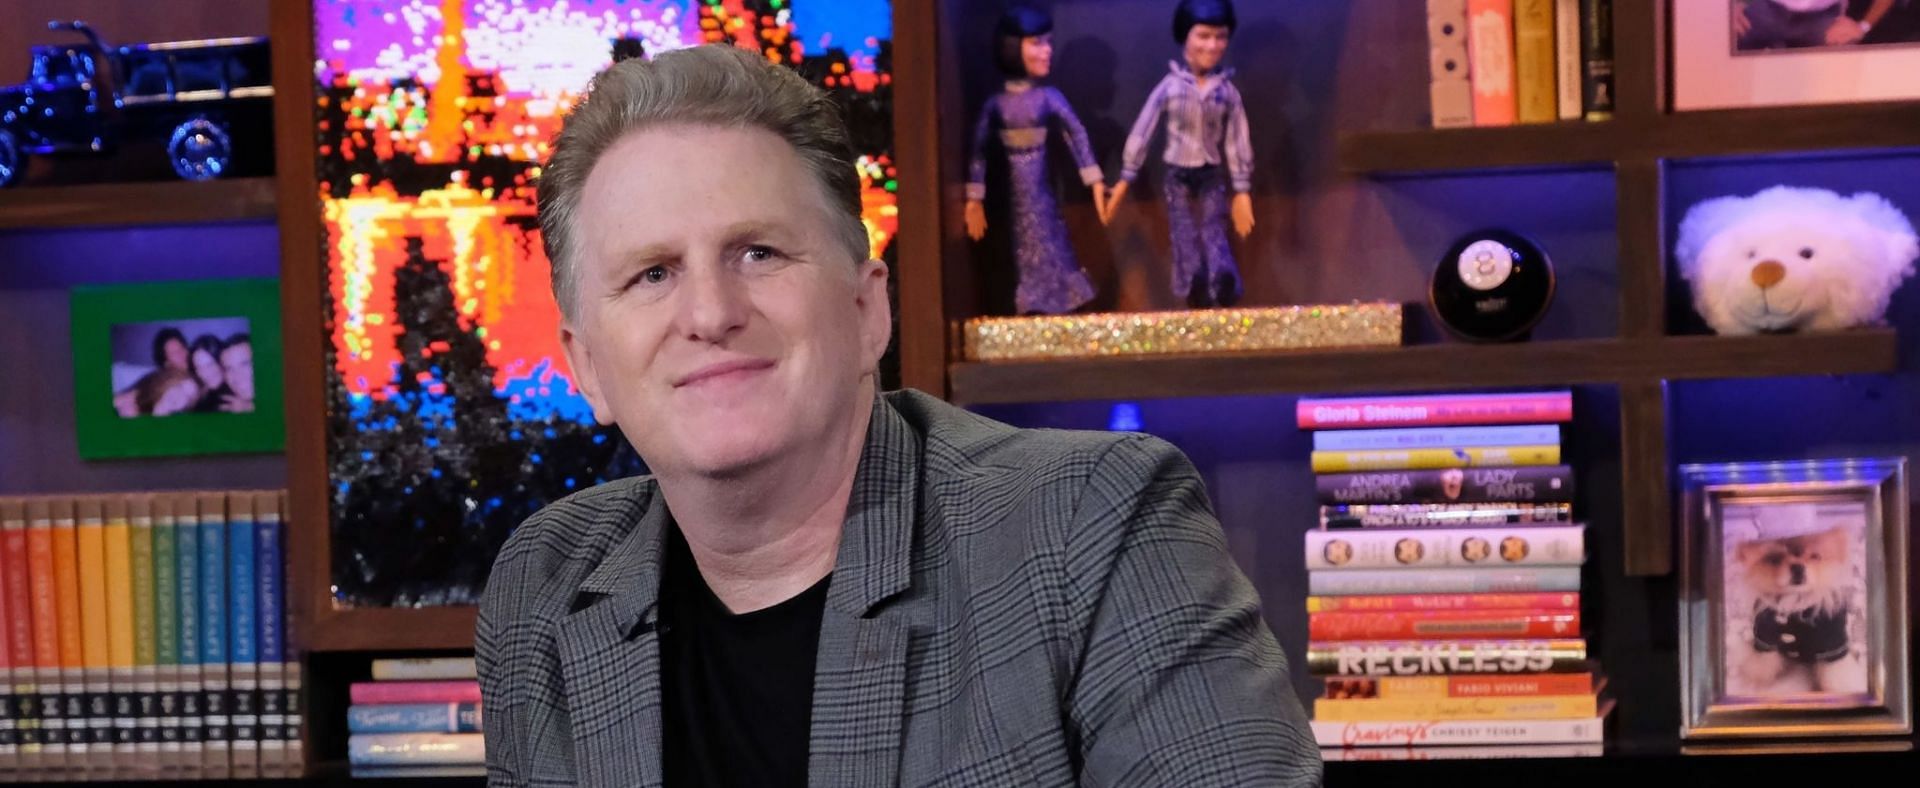 Actor Michael Rapaport filmed a video showing a man robbing Rite Aid in broad daylight (Image via Charles Sykes/Getty Images)